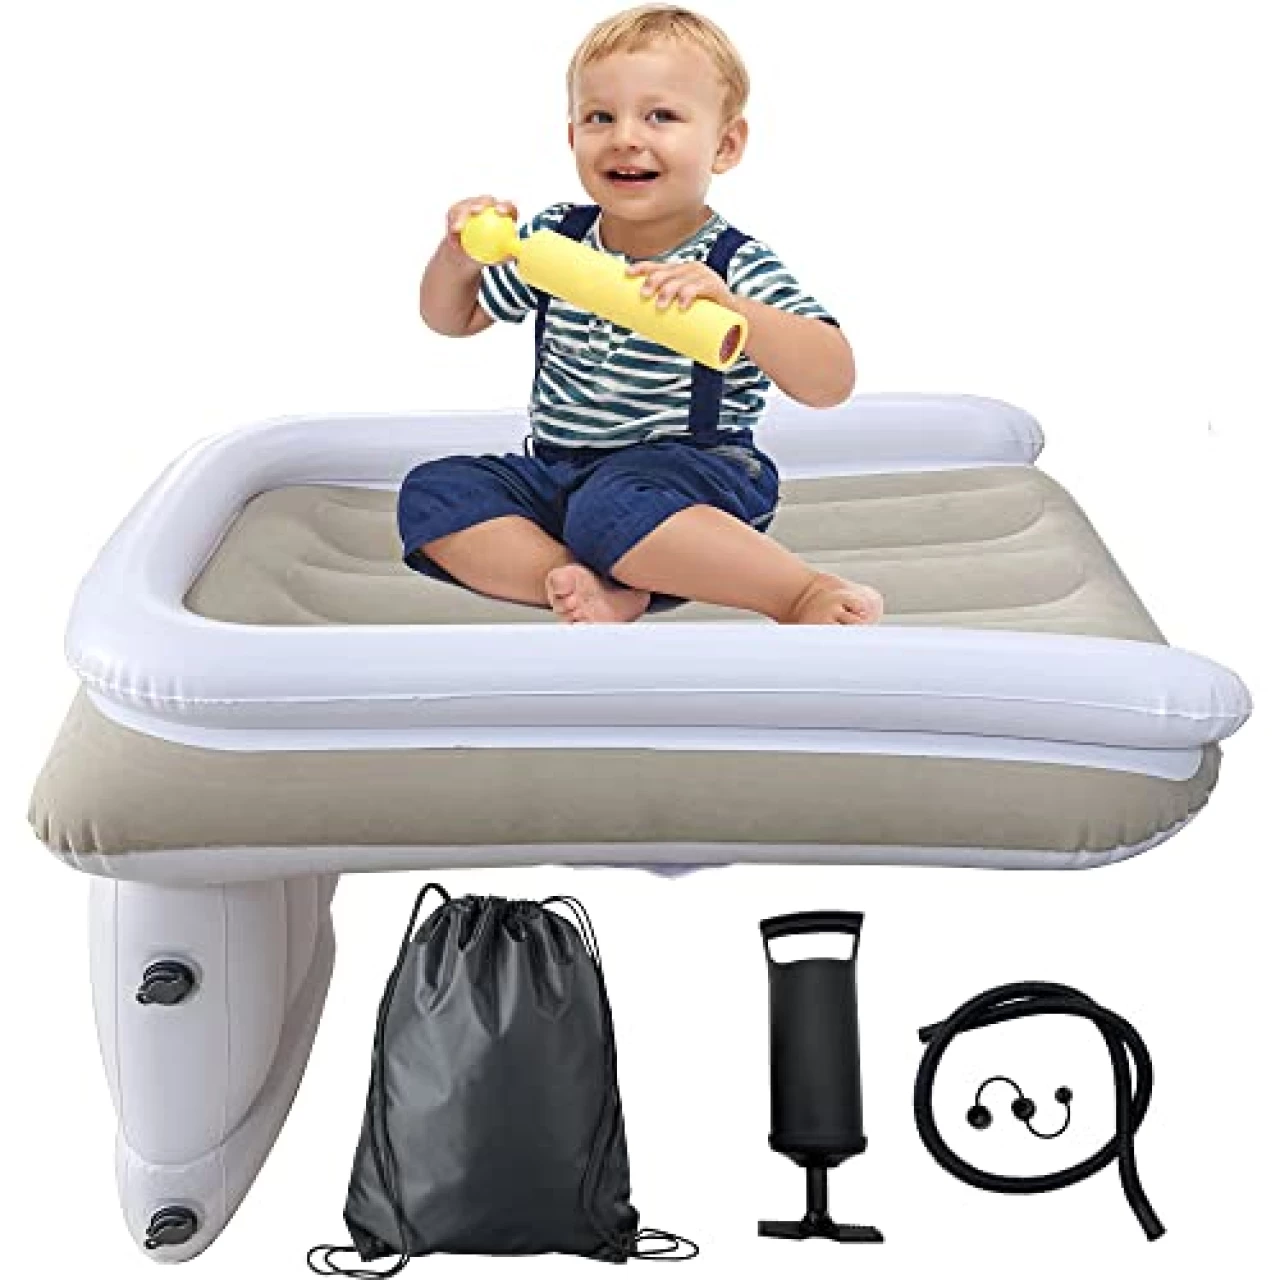 Inflatable Toddler Travel Bed, Baby Airplane Seat Extender, Inflatable Airplane Bed for Kids Included Inflatable Travel Bed, Manual Pump, Travel Bag